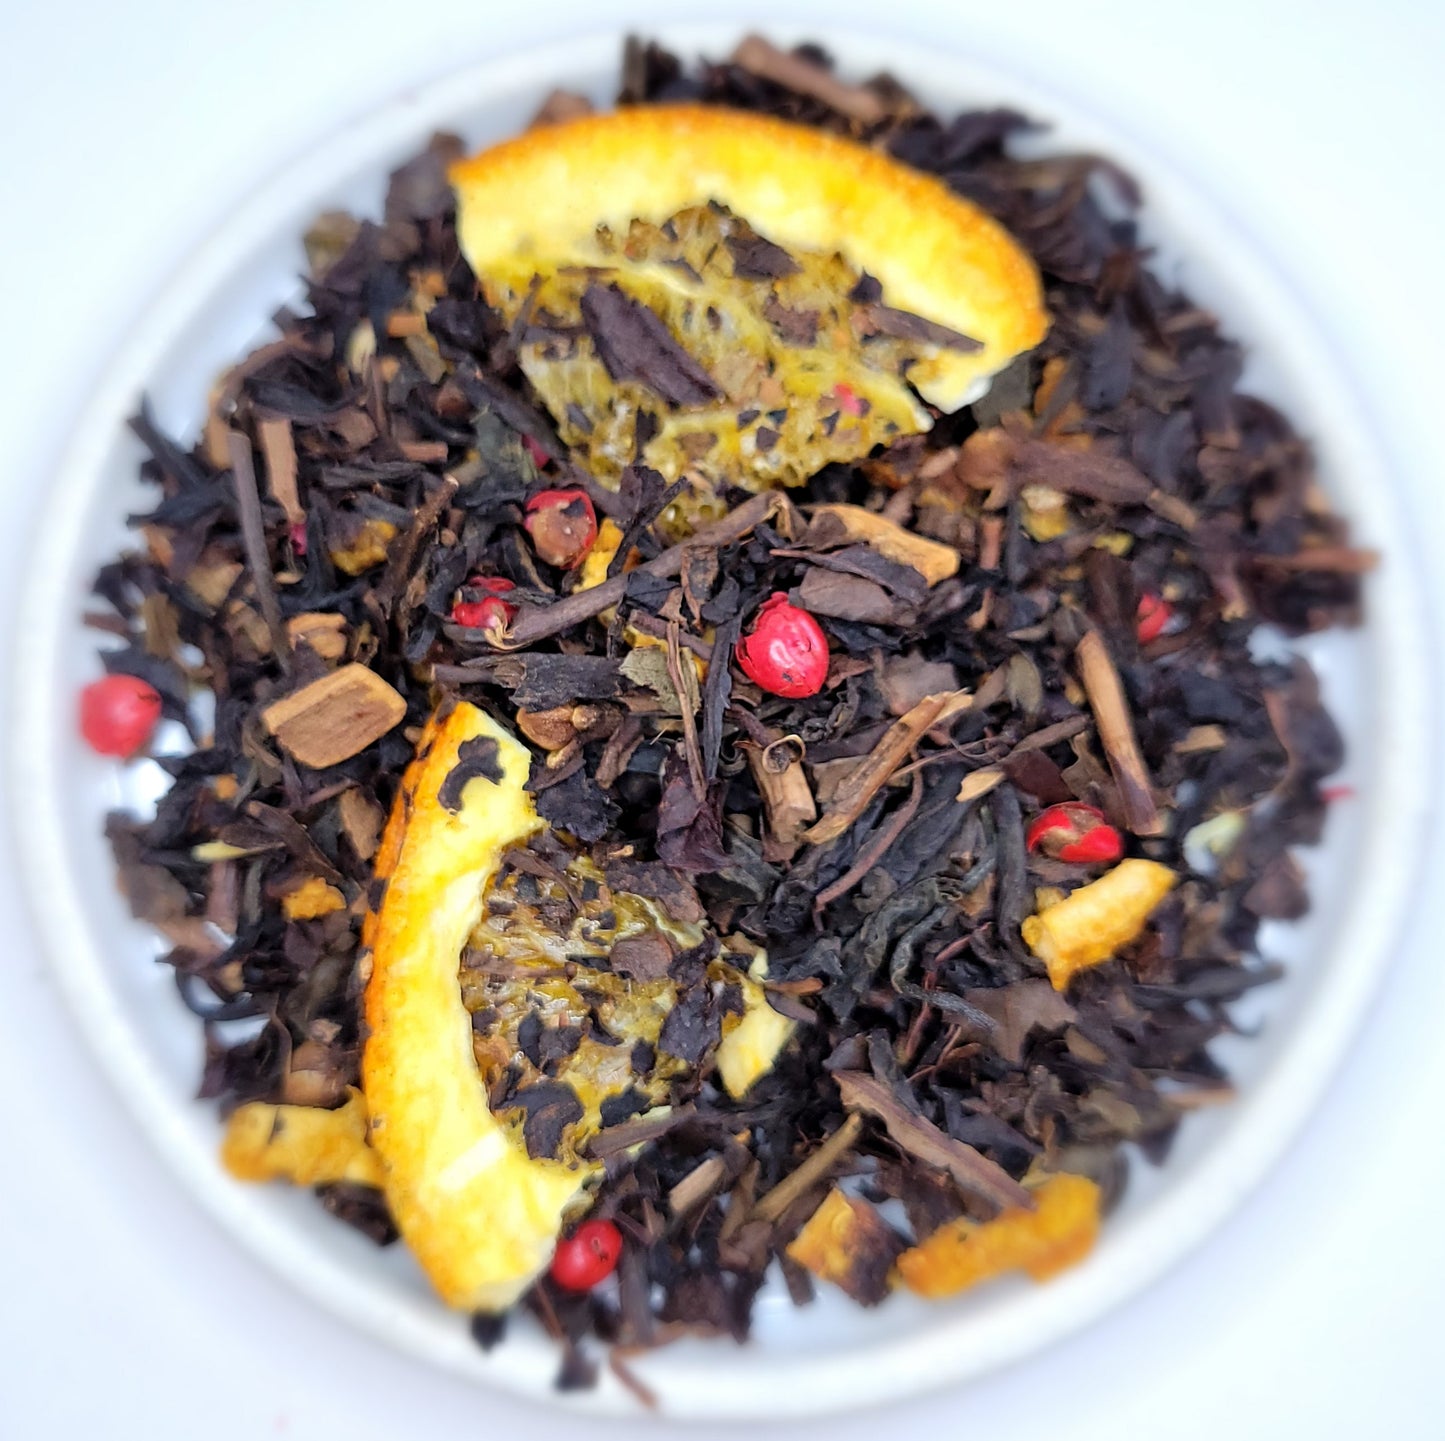 Solstice Blessings - Oolong Tea Blend (Formerly called Hisperades' Apple)